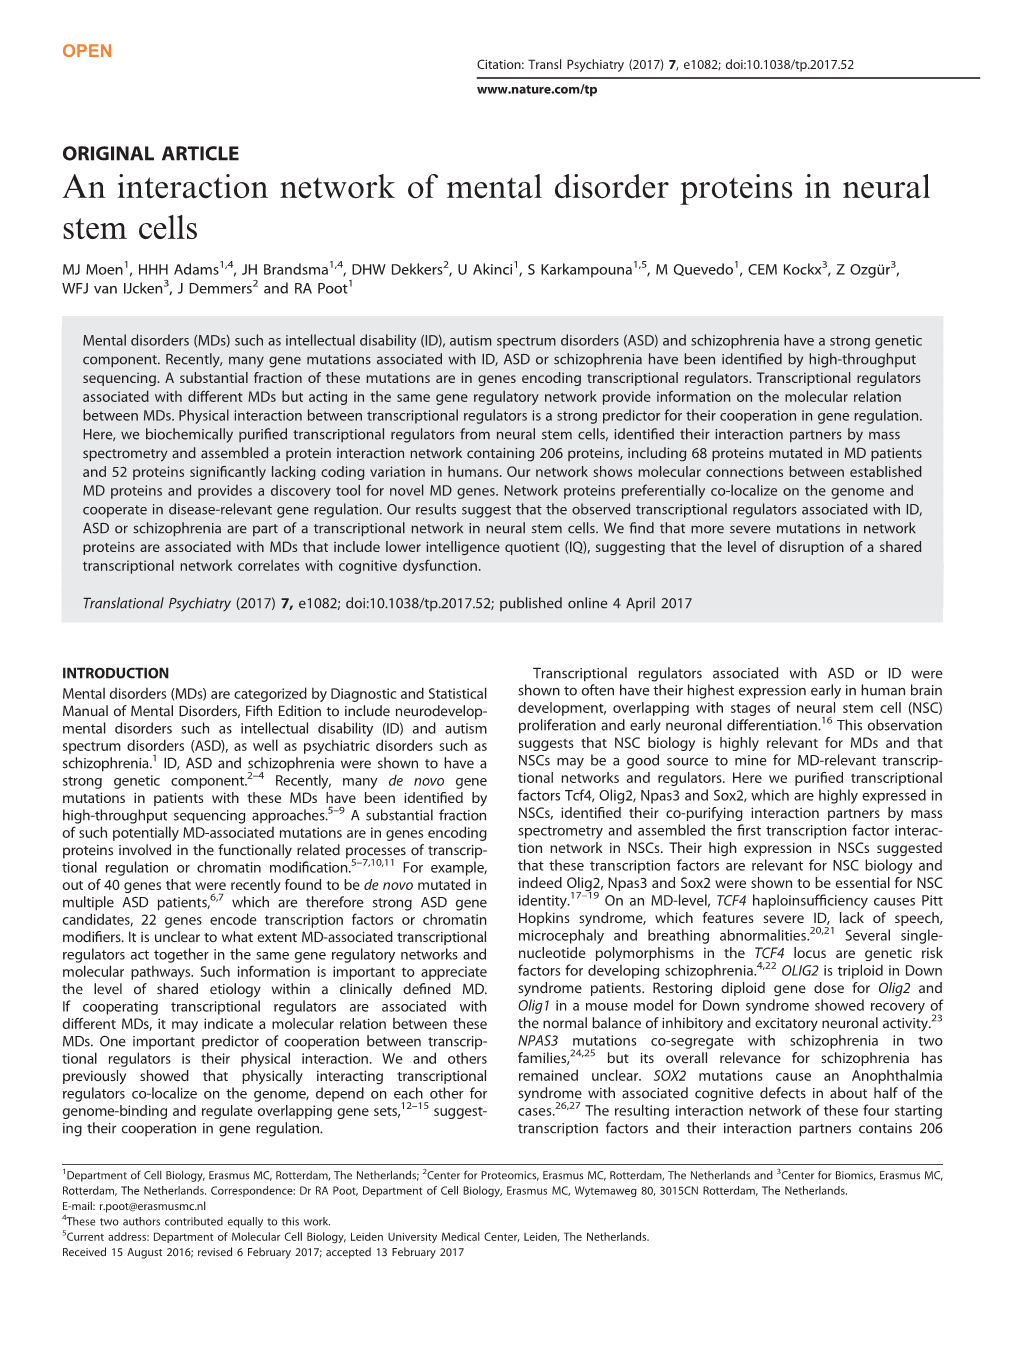 An Interaction Network of Mental Disorder Proteins in Neural Stem Cells